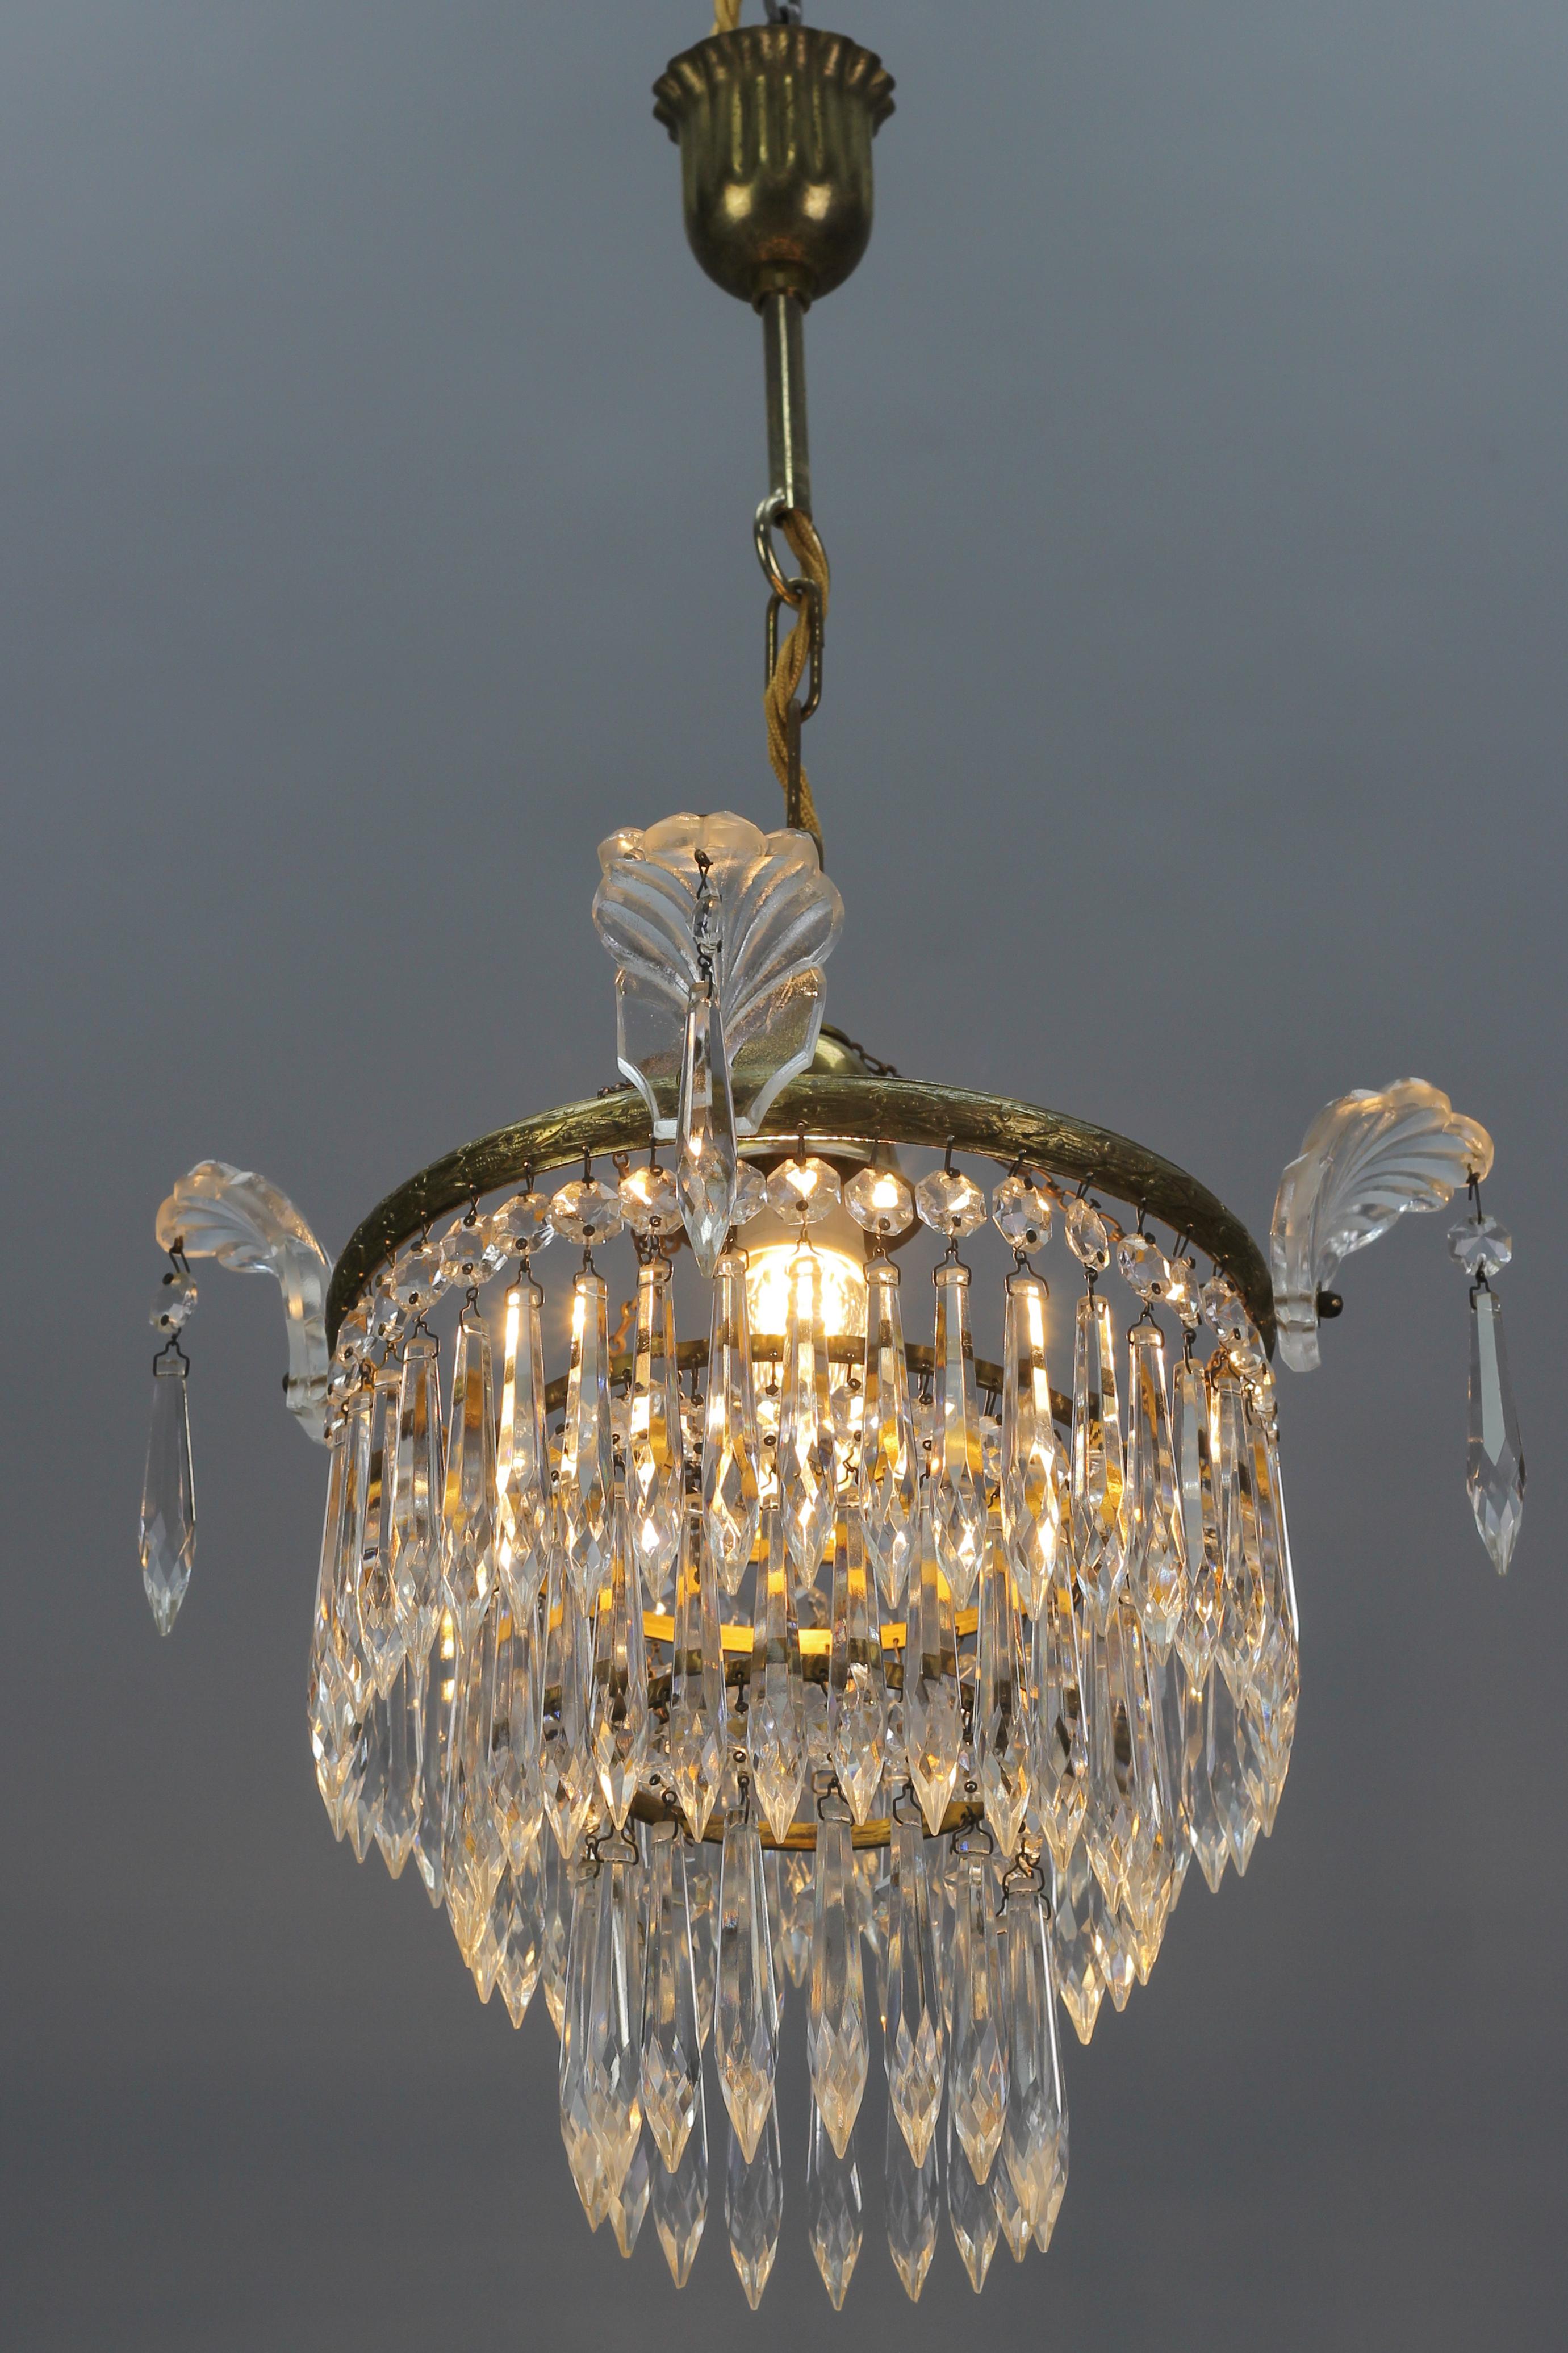 French Empire style crystal glass and brass three-tired chandelier, the 1930s.
Charming and compact French Empire-style crystal glass and brass chandelier from the 1930s. This lovely piece has an ornate bronze frame hung with beads and prisms of